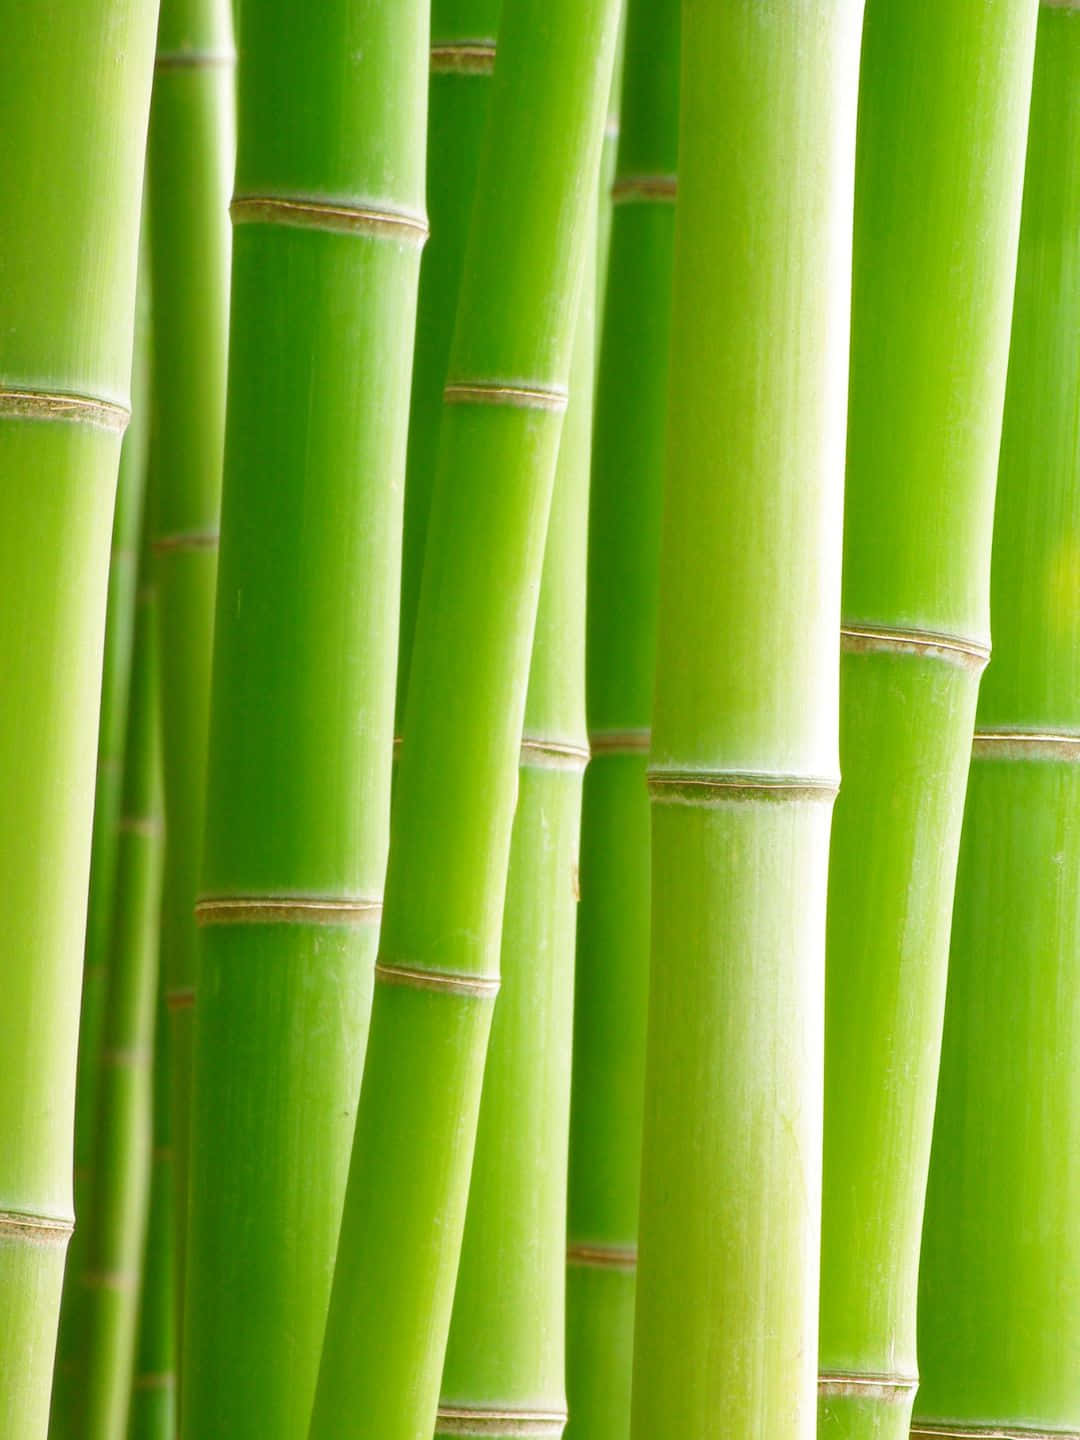 1440p Bamboo Background Light Green Stems Bunched Up